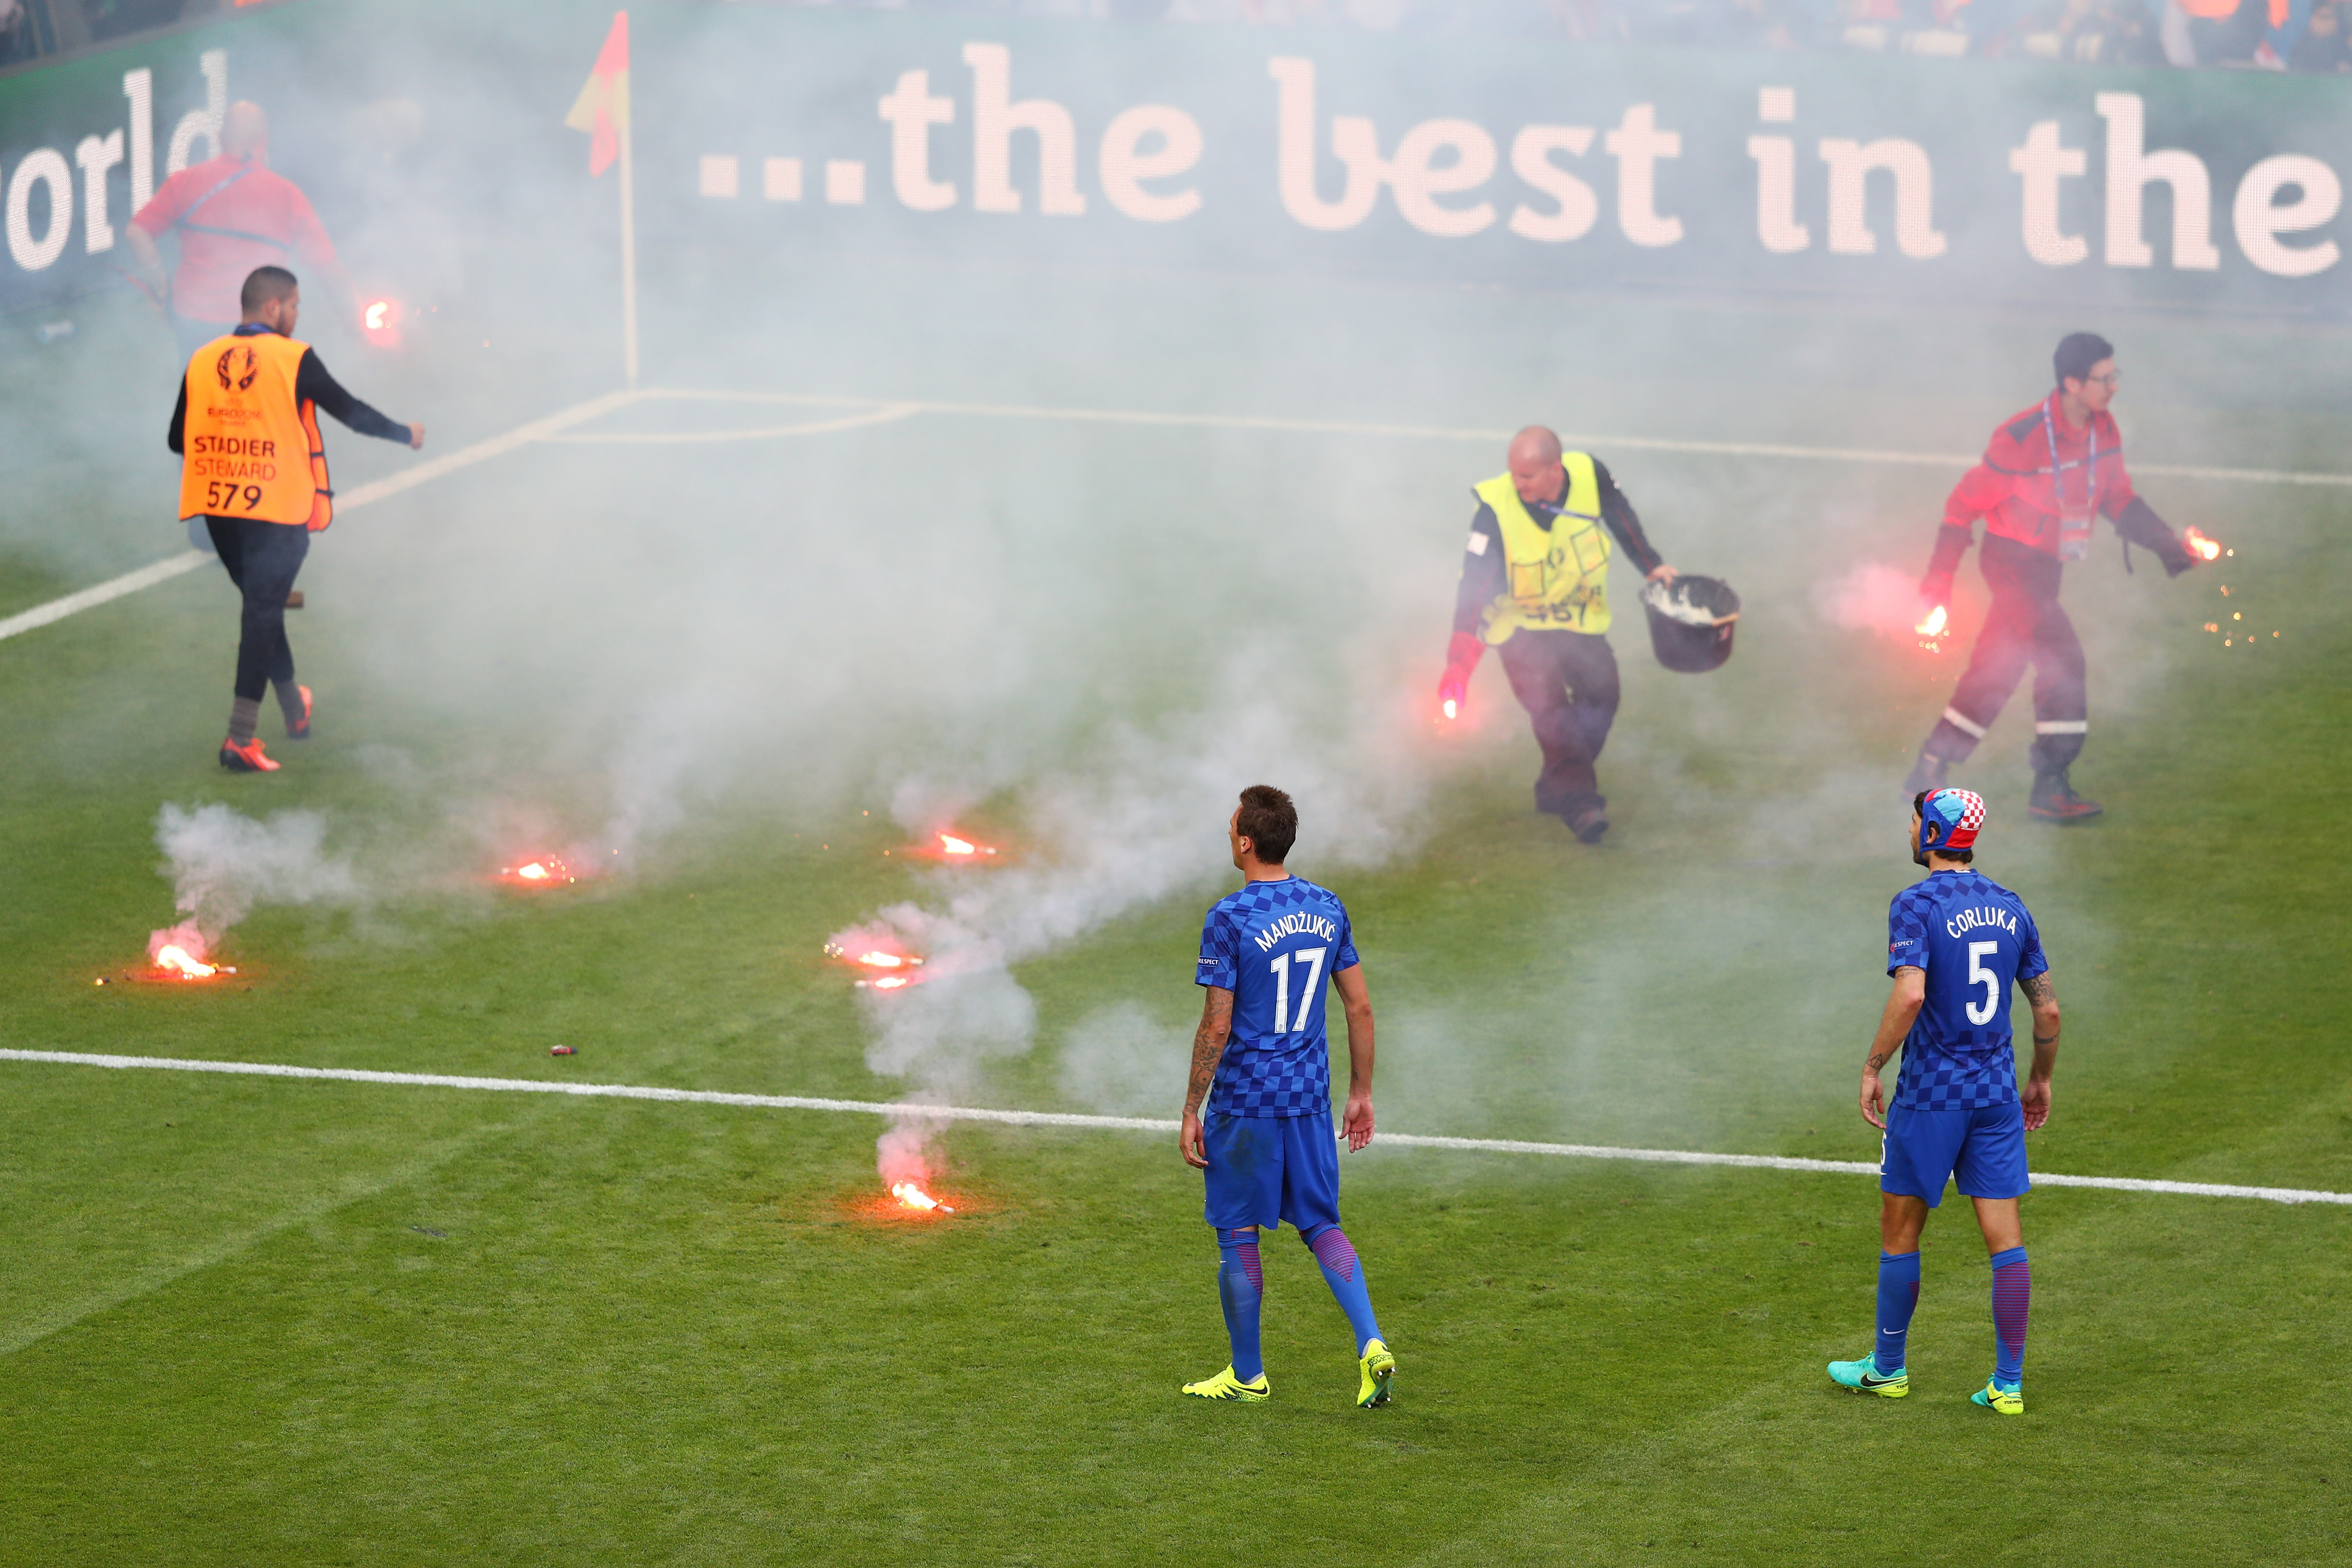 SAINT-ETIENNE, FRANCE - JUNE 17: Mario Mandzukic of Croatia and Vedran Corluka of Croatia look on as fire marshal's take flares from the pitch during the UEFA EURO 2016 Group D match between Czech Republic and Croatia at Stade Geoffroy-Guichard on June 17, 2016 in Saint-Etienne, France.  (Photo by Michael Steele/Getty Images)